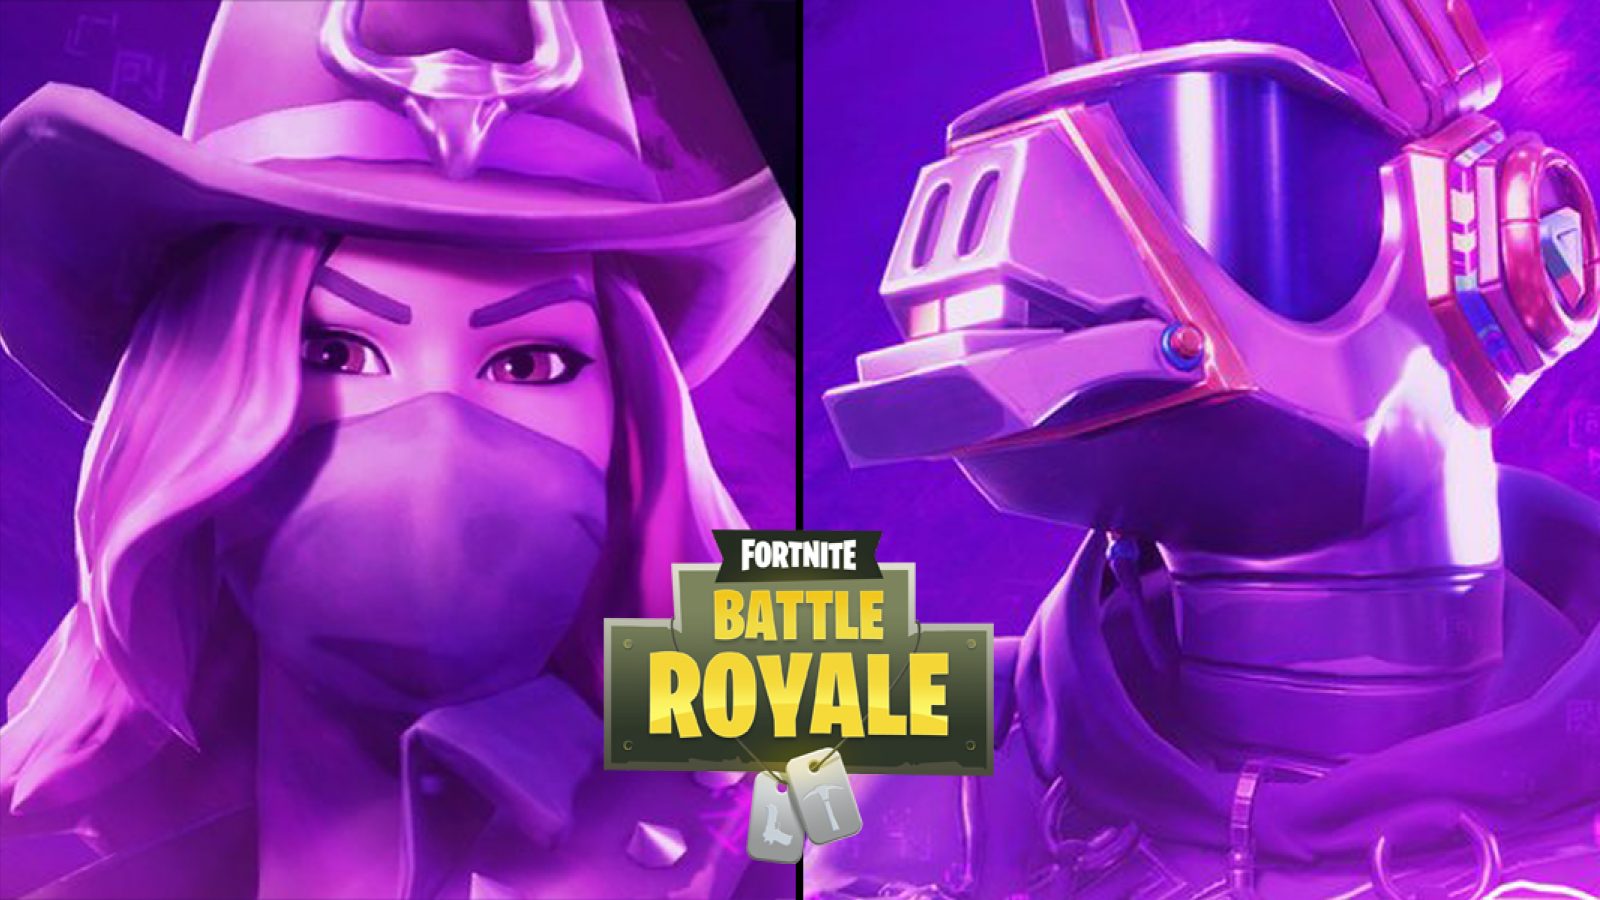 The Fortnite Season 6 teaser images seem to be forming a bigger